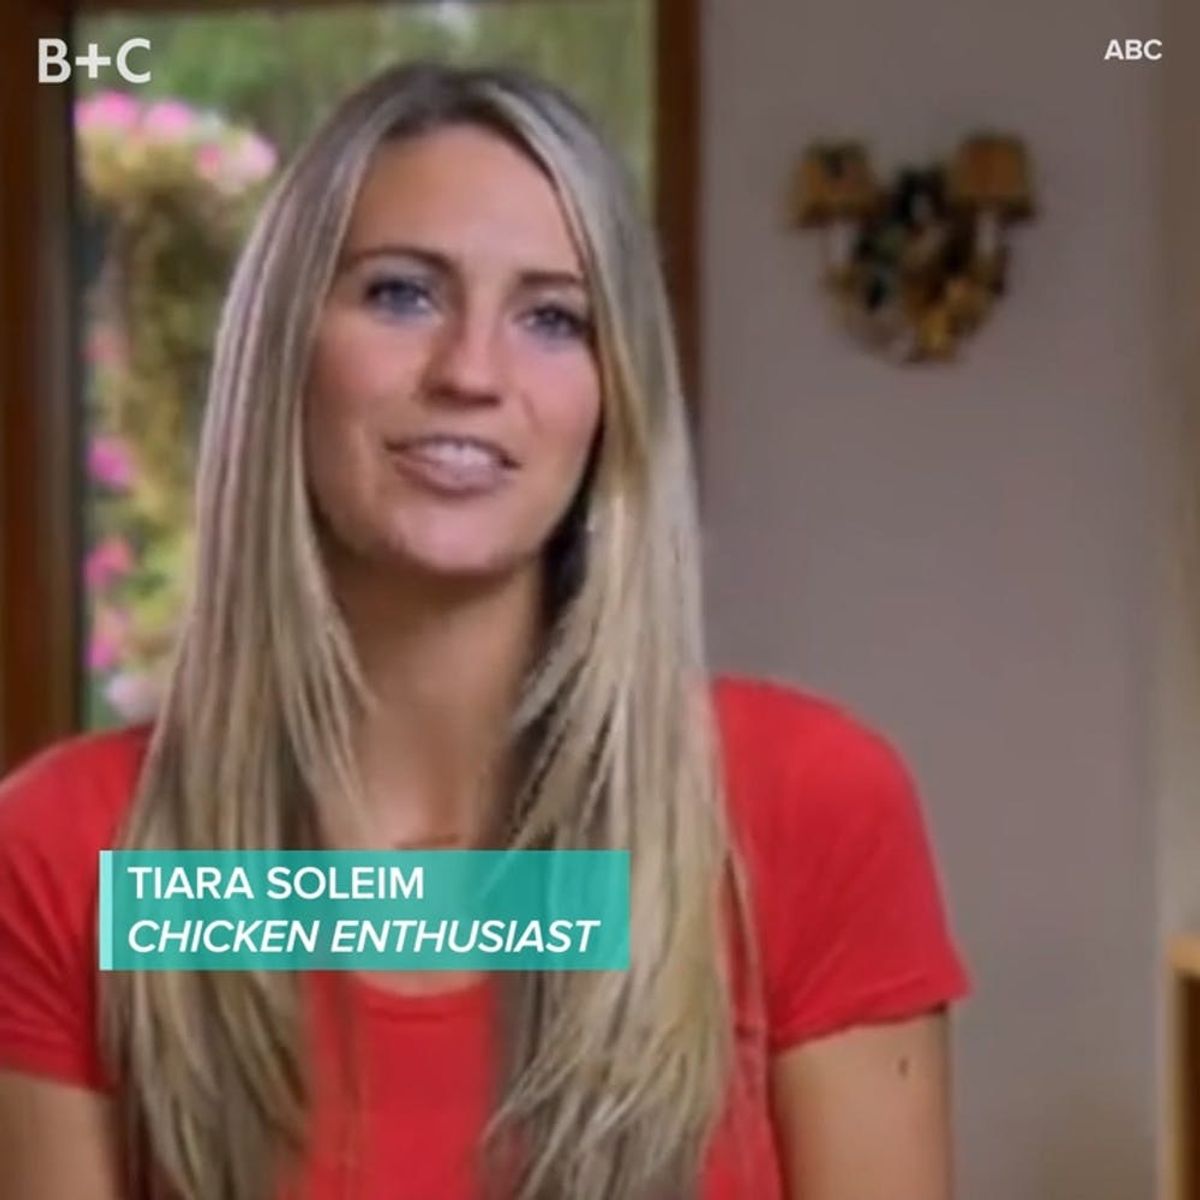 The Most Ridiculous Job Titles in Bachelor Nation